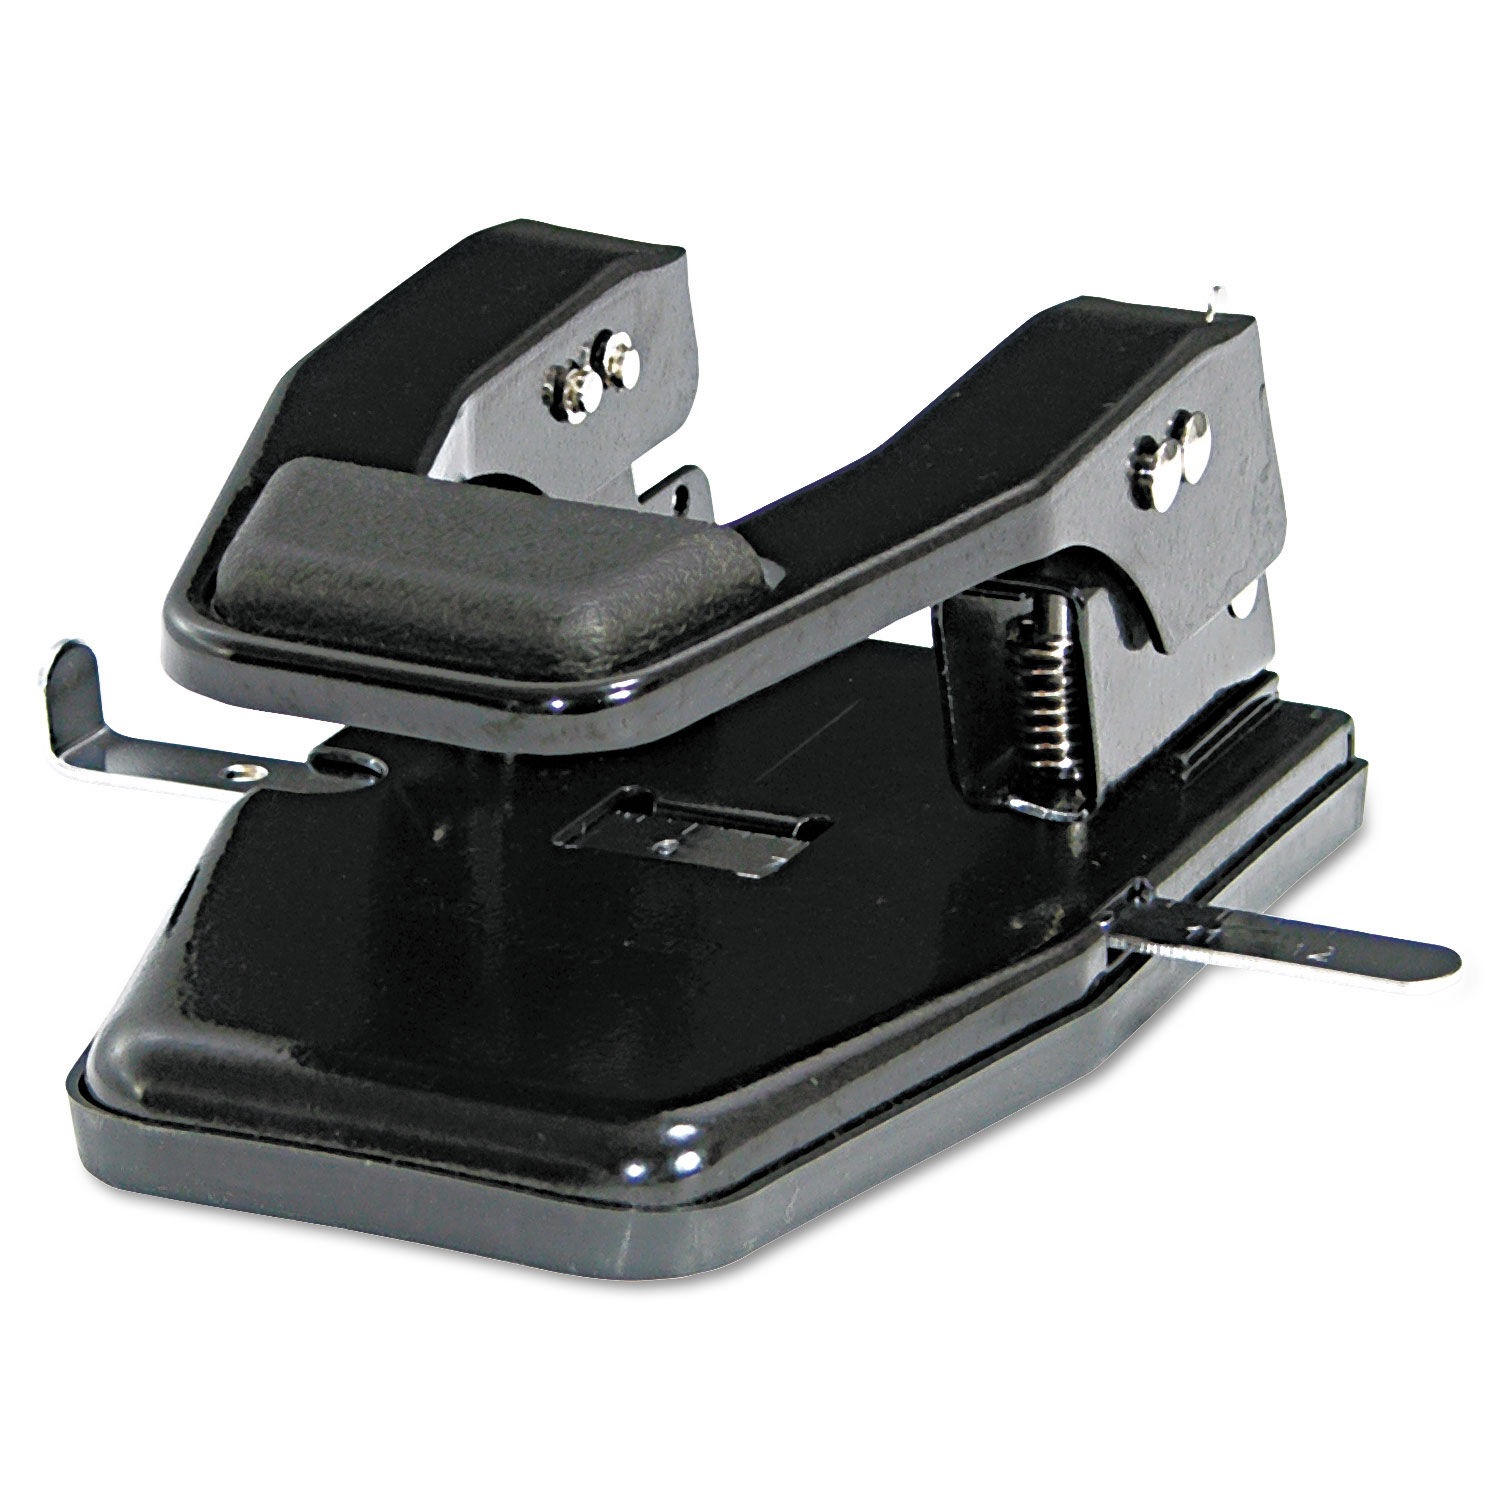 MATMP250 - Master® Heavy-Duty Two Hole Punch